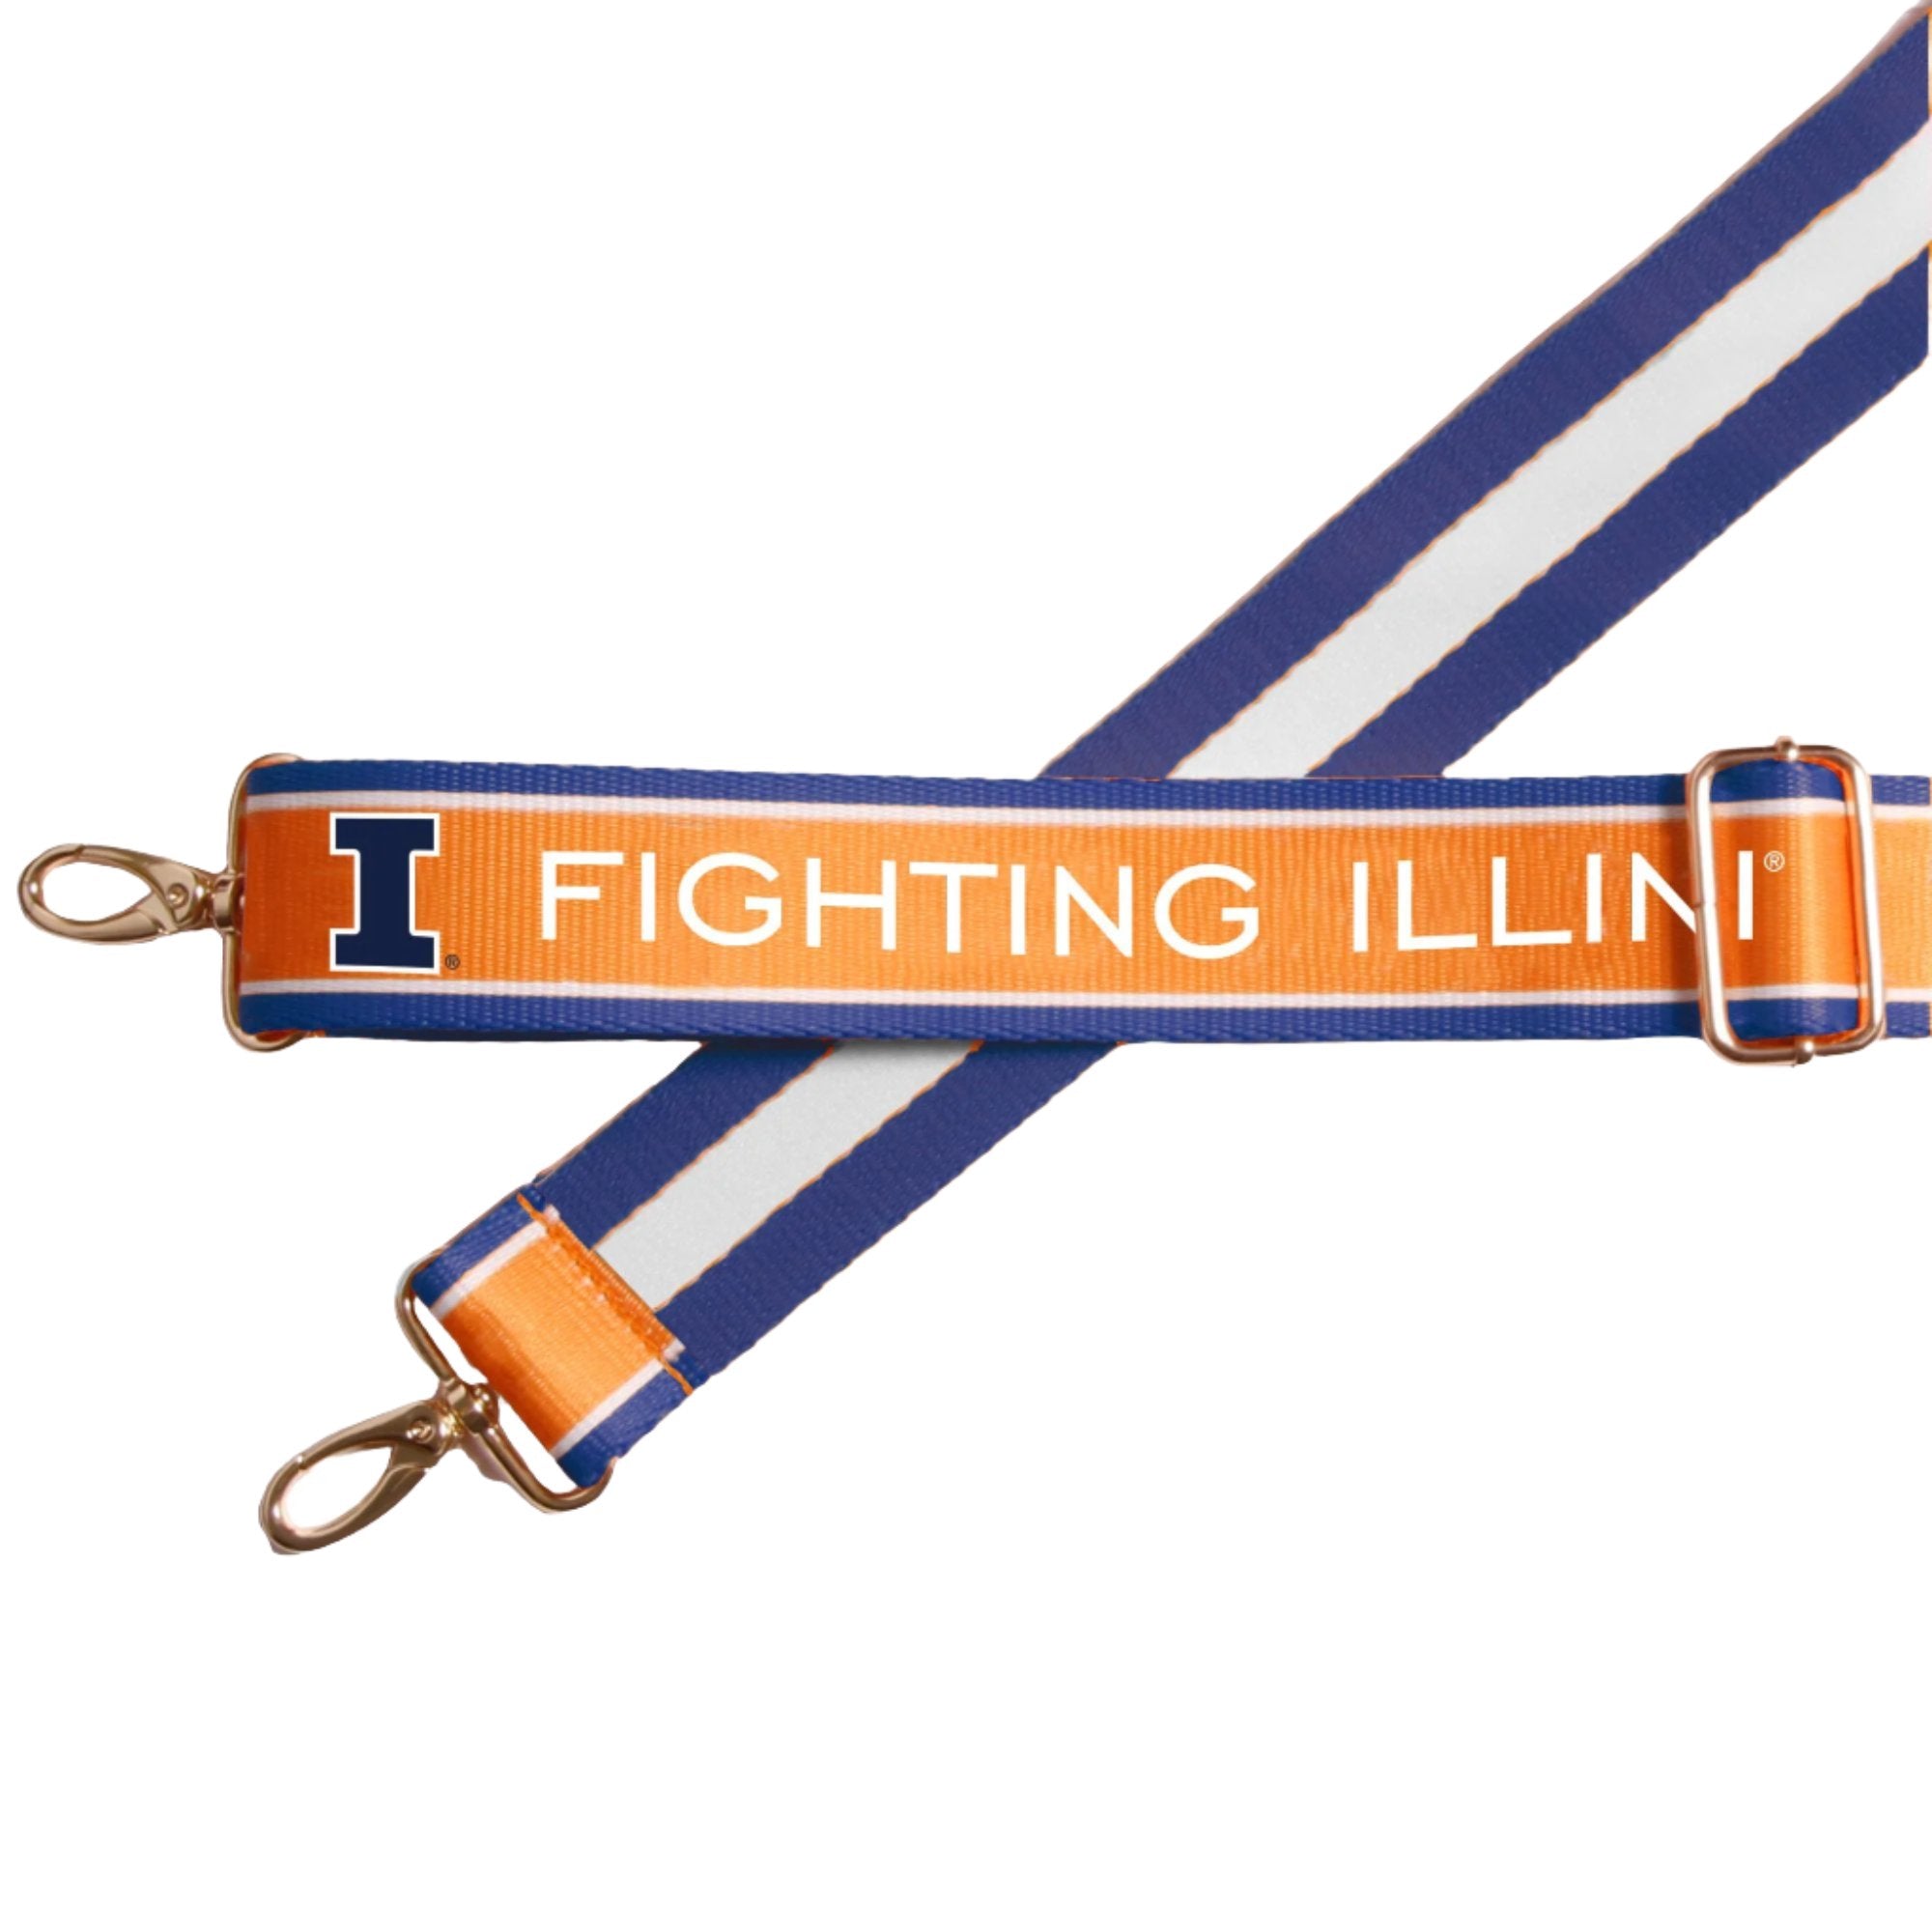 ILLINOIS 1.5" - Officially Licensed - Stripe